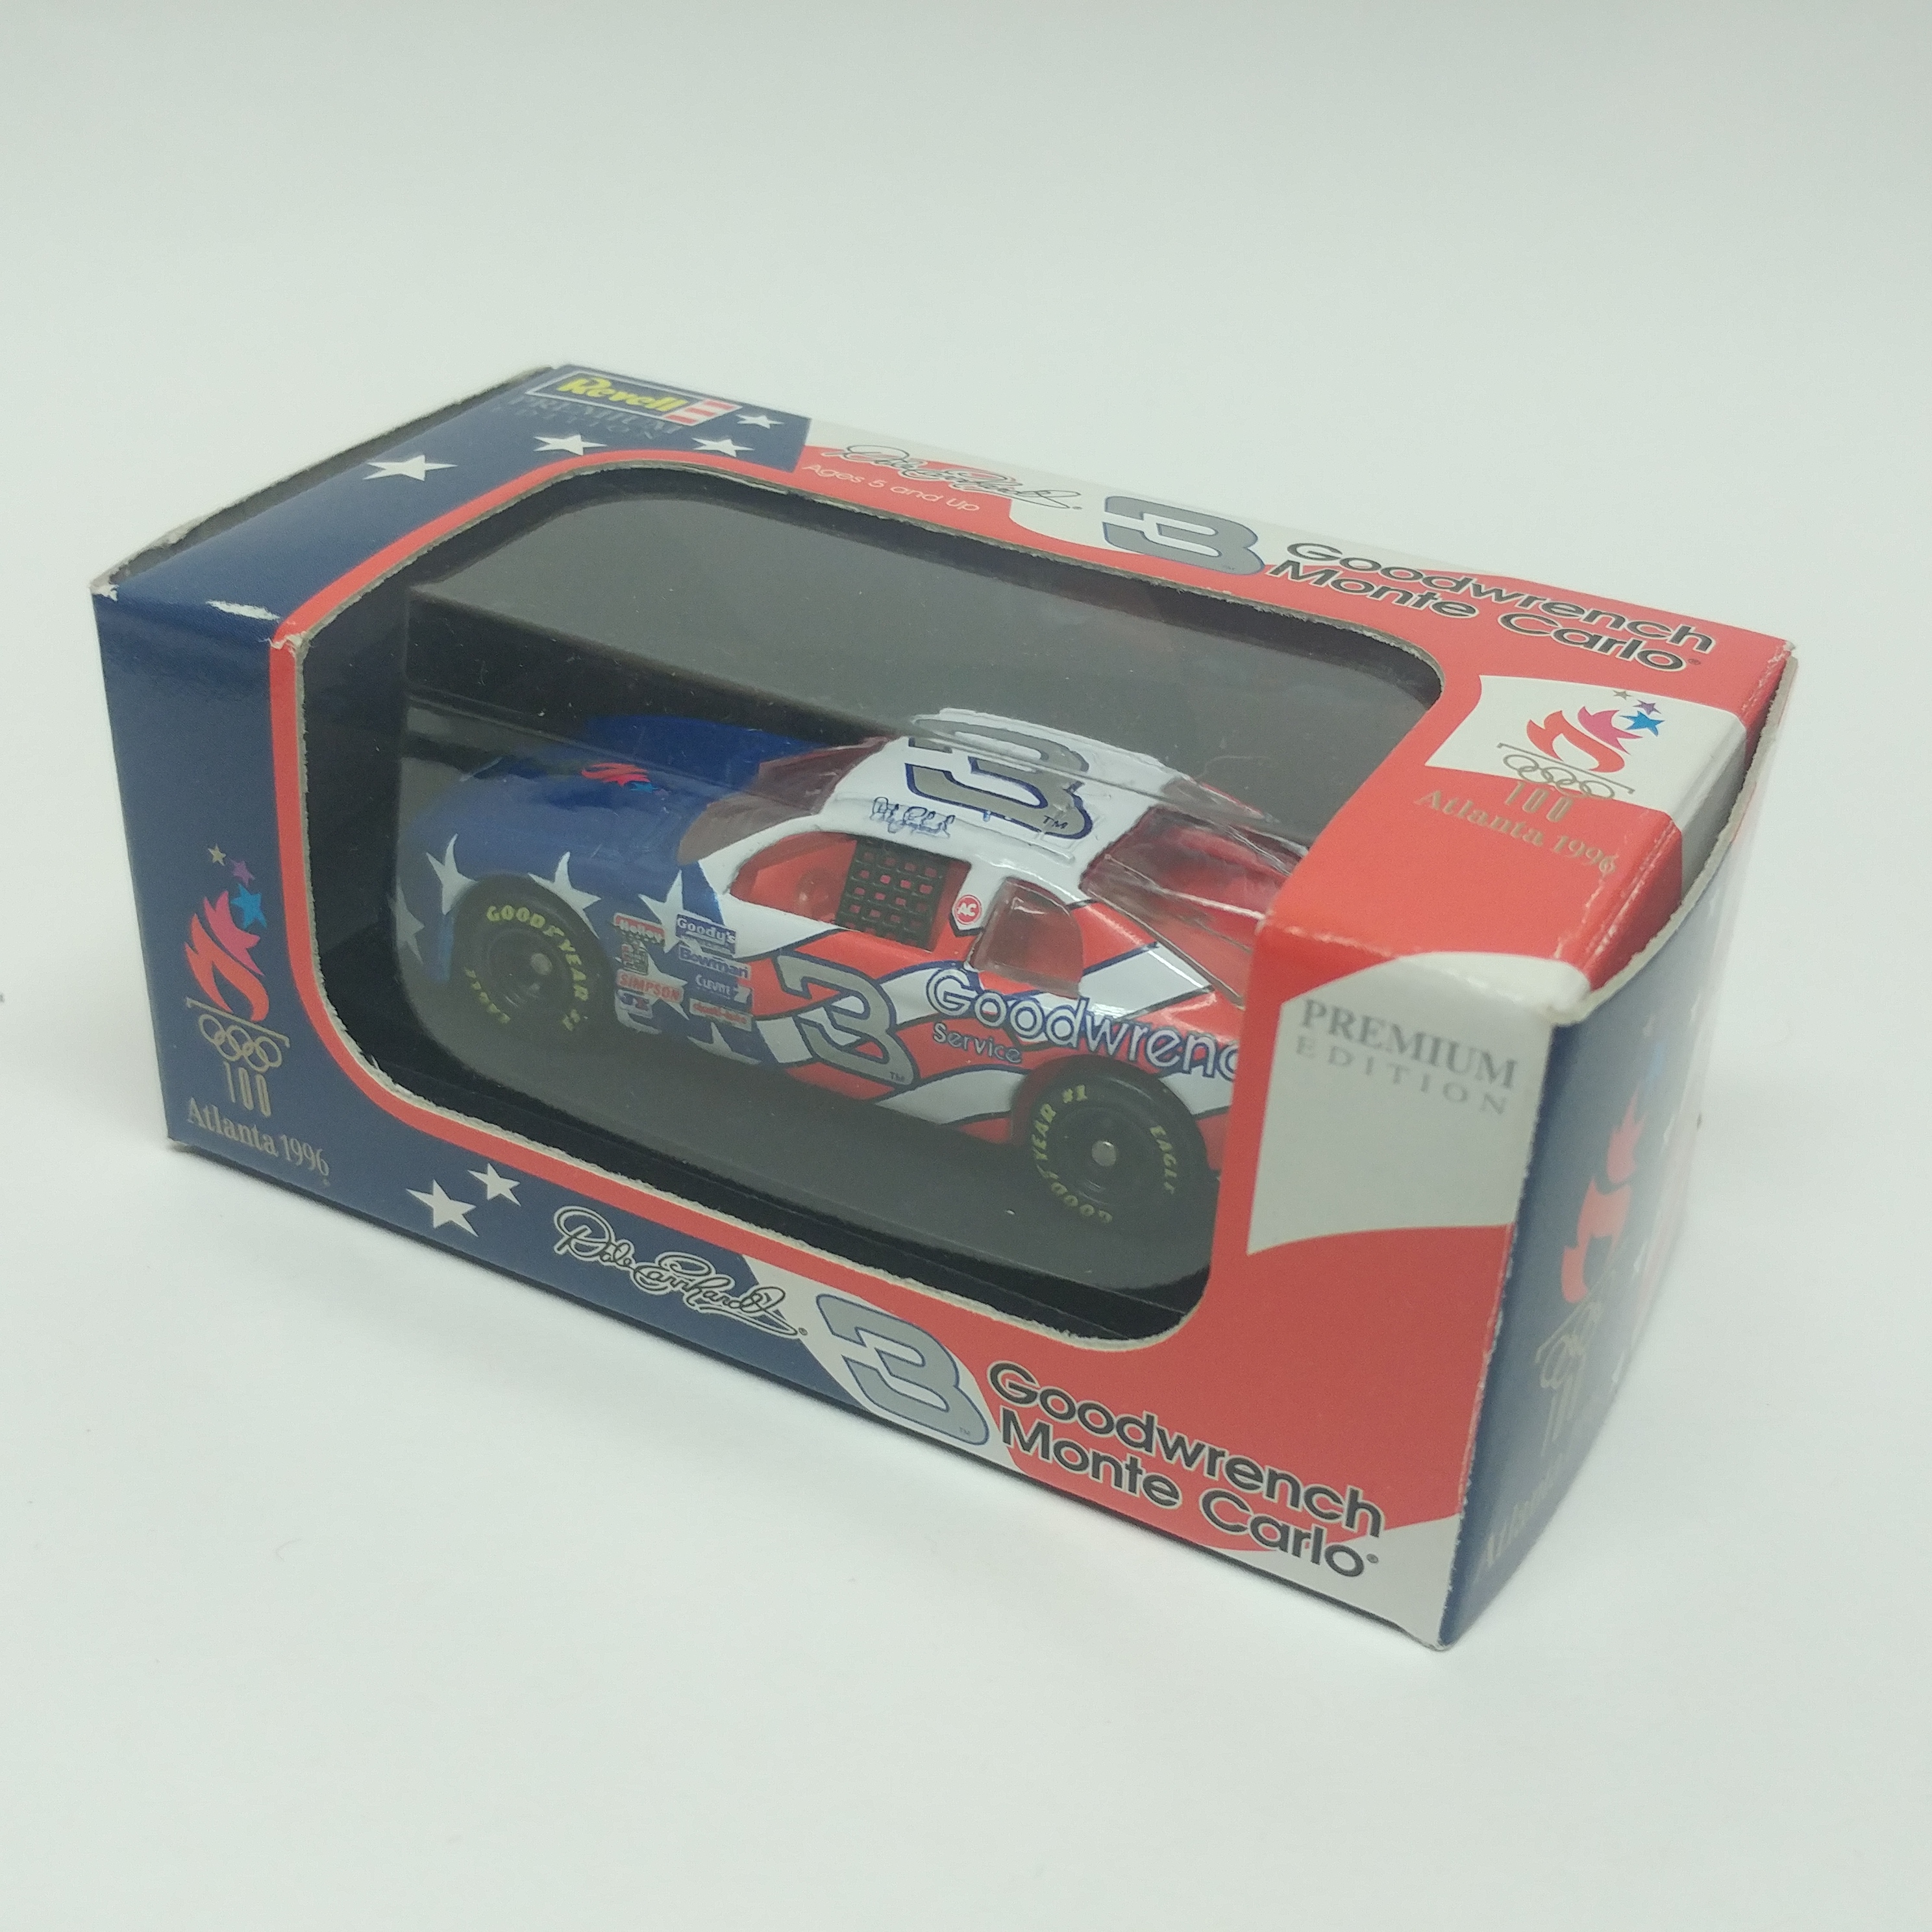 Sports Image 1996 Atlanta Olympic Dale Earnhardt  Goodwrench Diecast  1/64